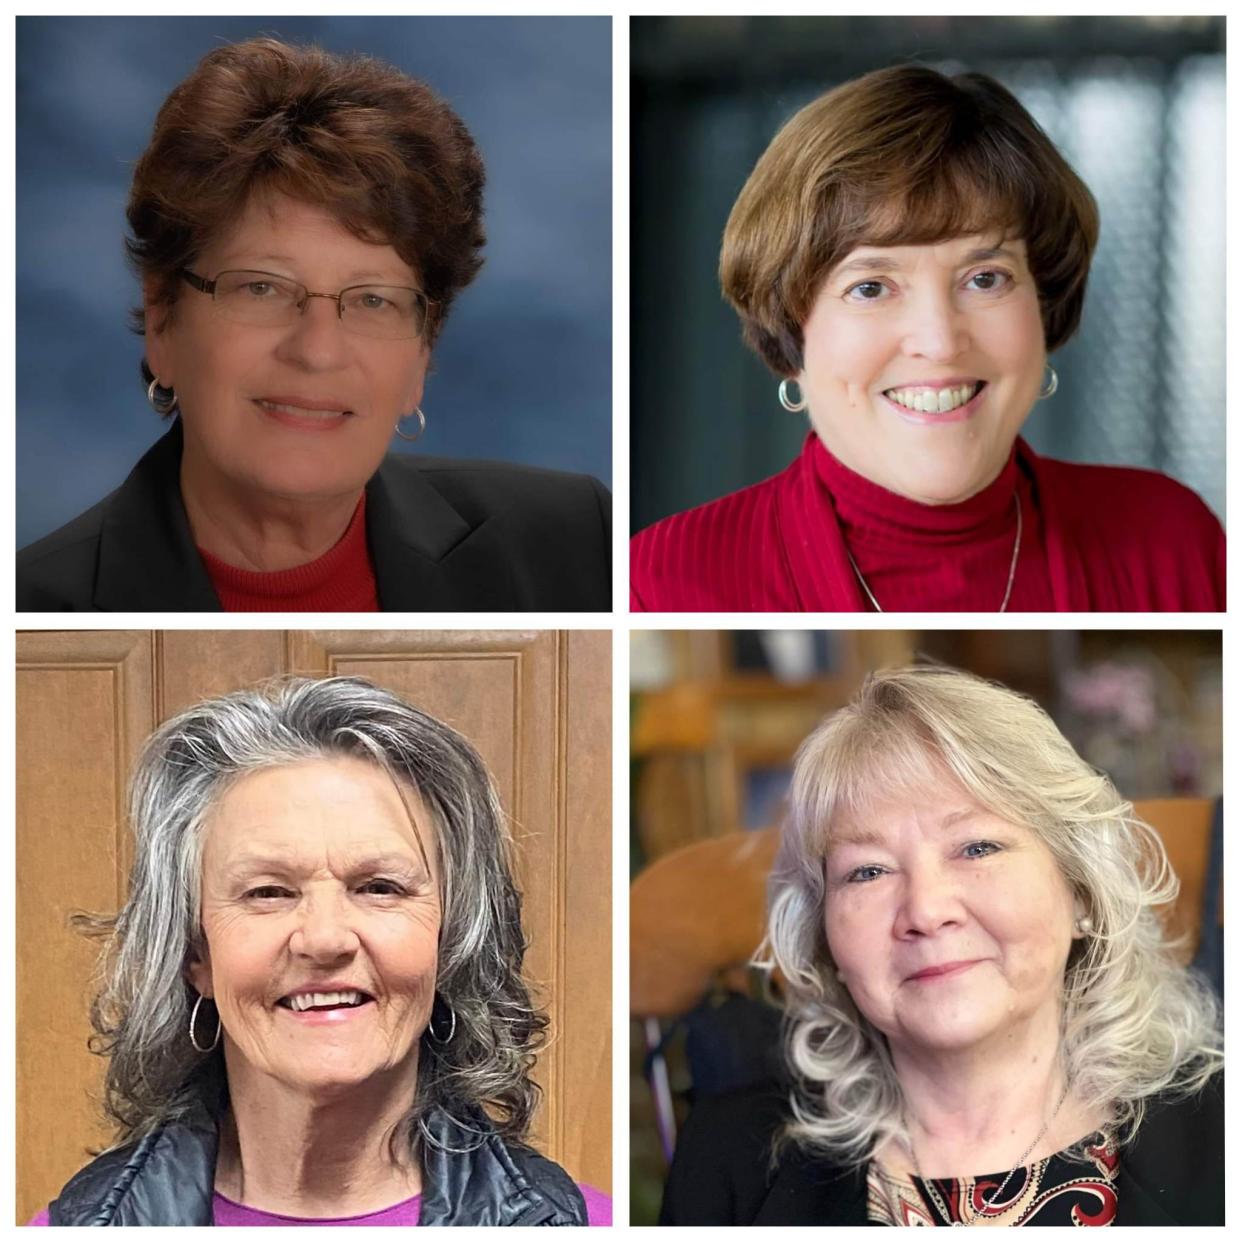 From left to right are the 2023 Henderson County Education Foundation Hall of Fame Class, top row: Dr. Kathy Revis, Brenda Walker Gorsuch; bottom row: Ingrid McNair and Patricia Allen.